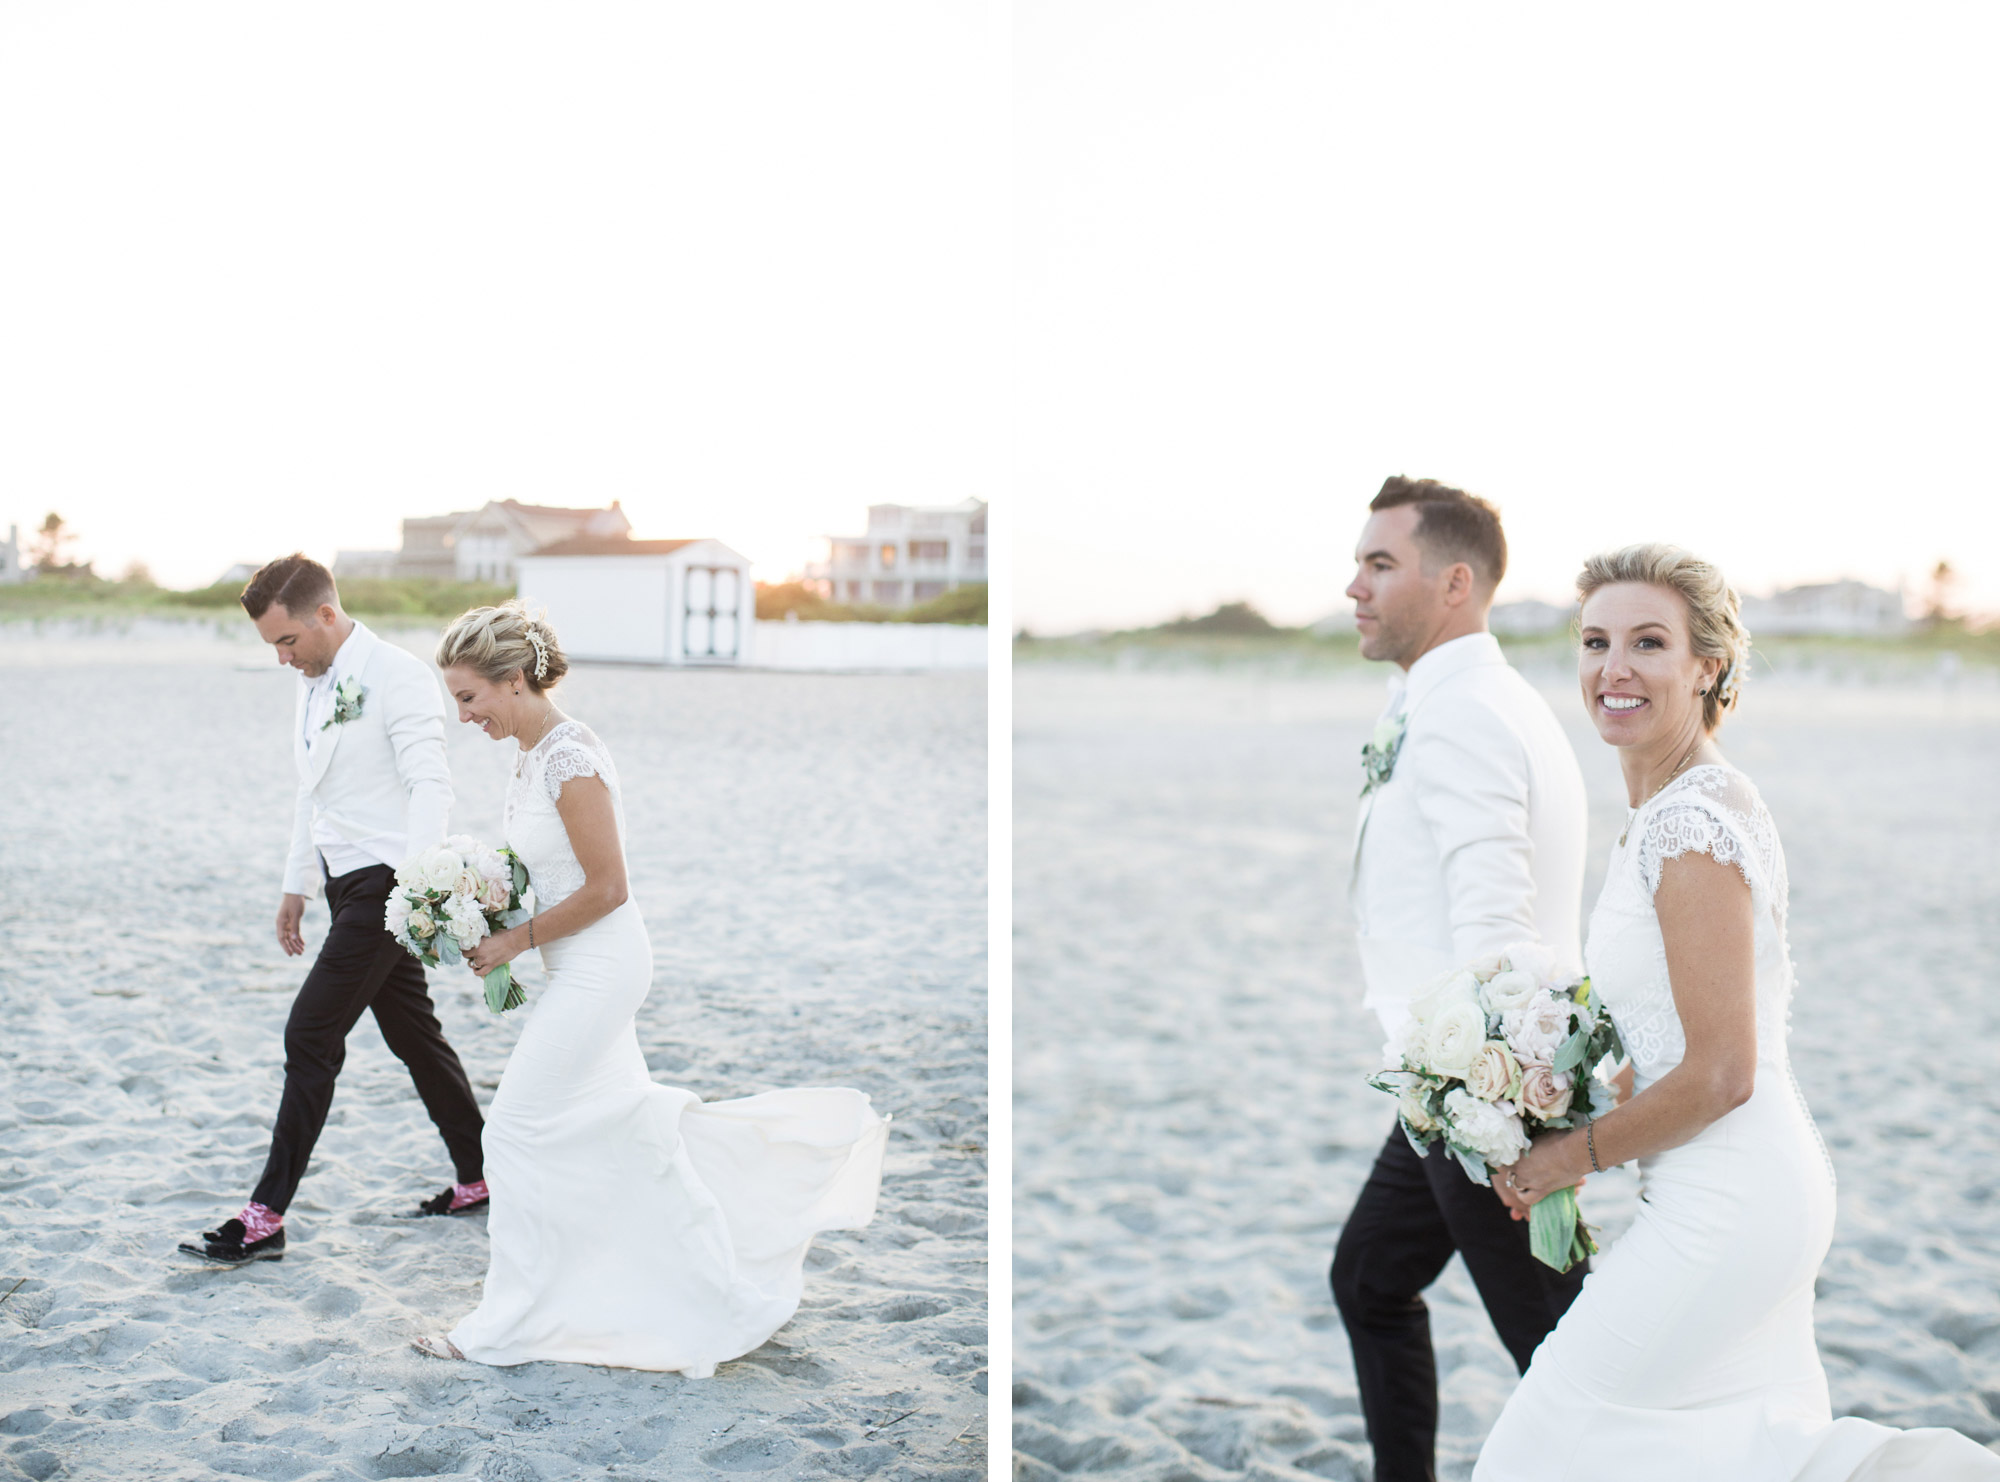 Wedding in Cape May, New Jersey. Photos by Kelly Kollar Photography.